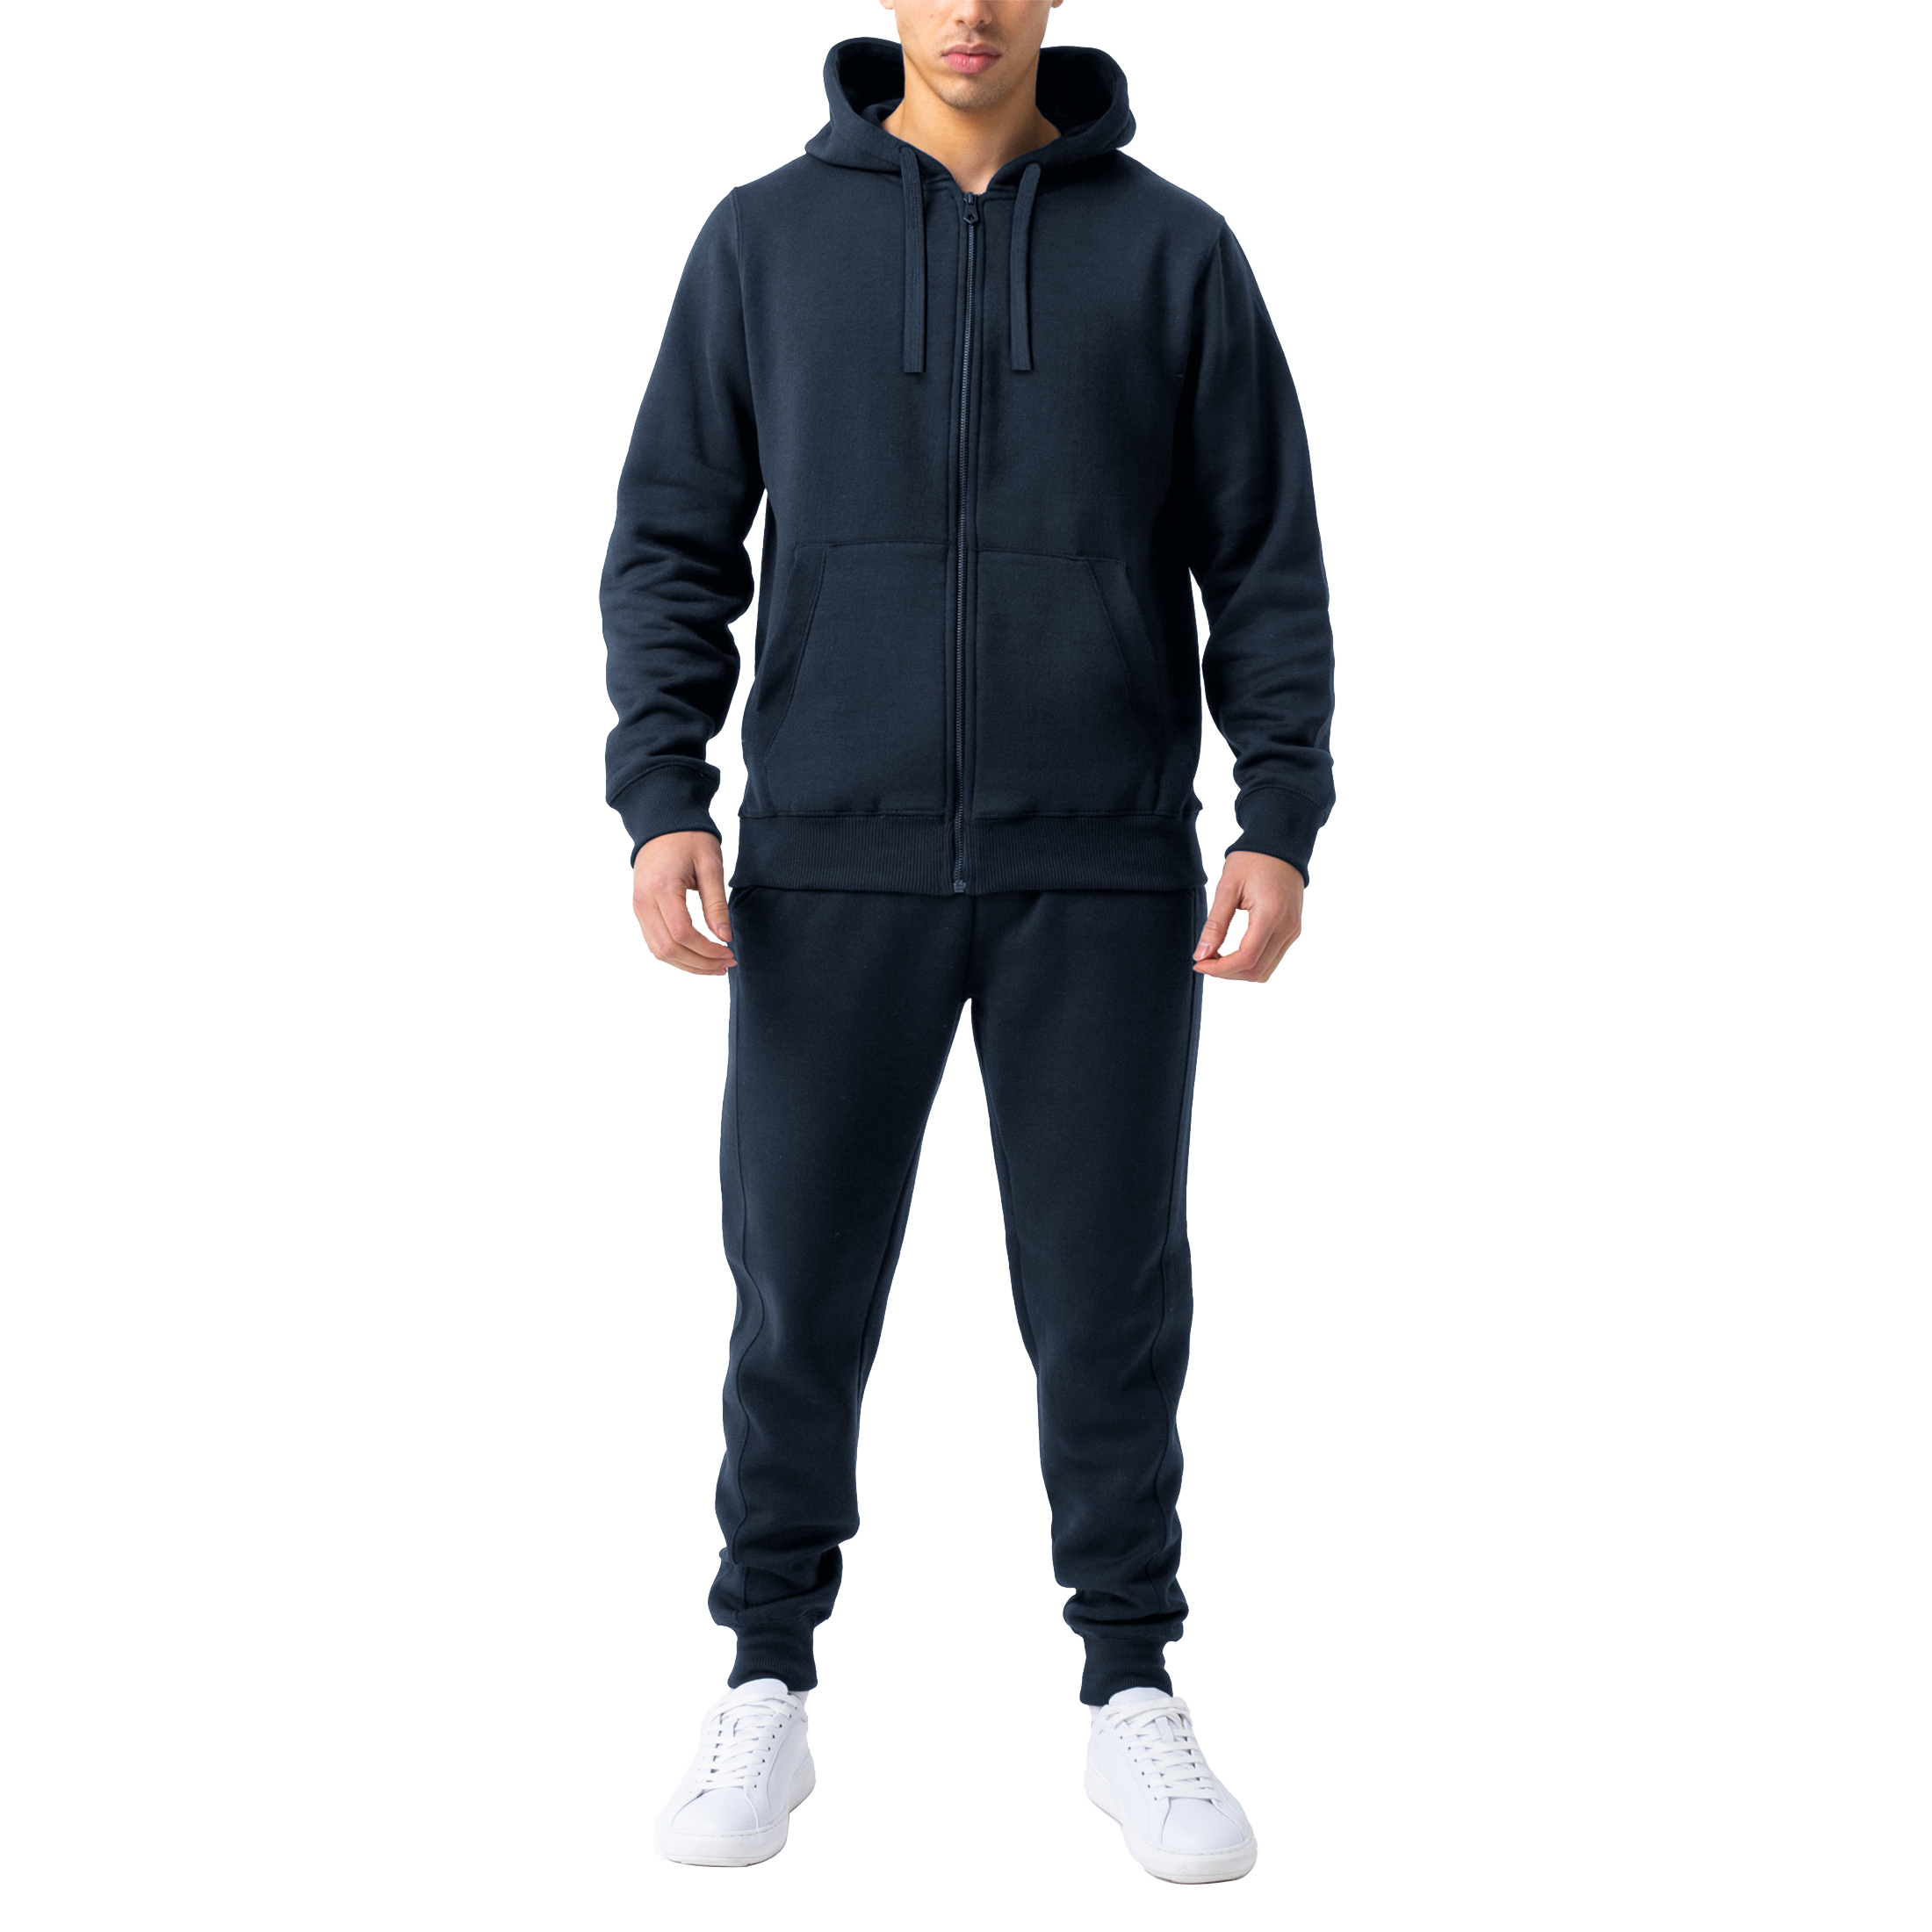 Men's Casual Jogging Athletic Active Full Zip Up Tracksuit - Navy, Large